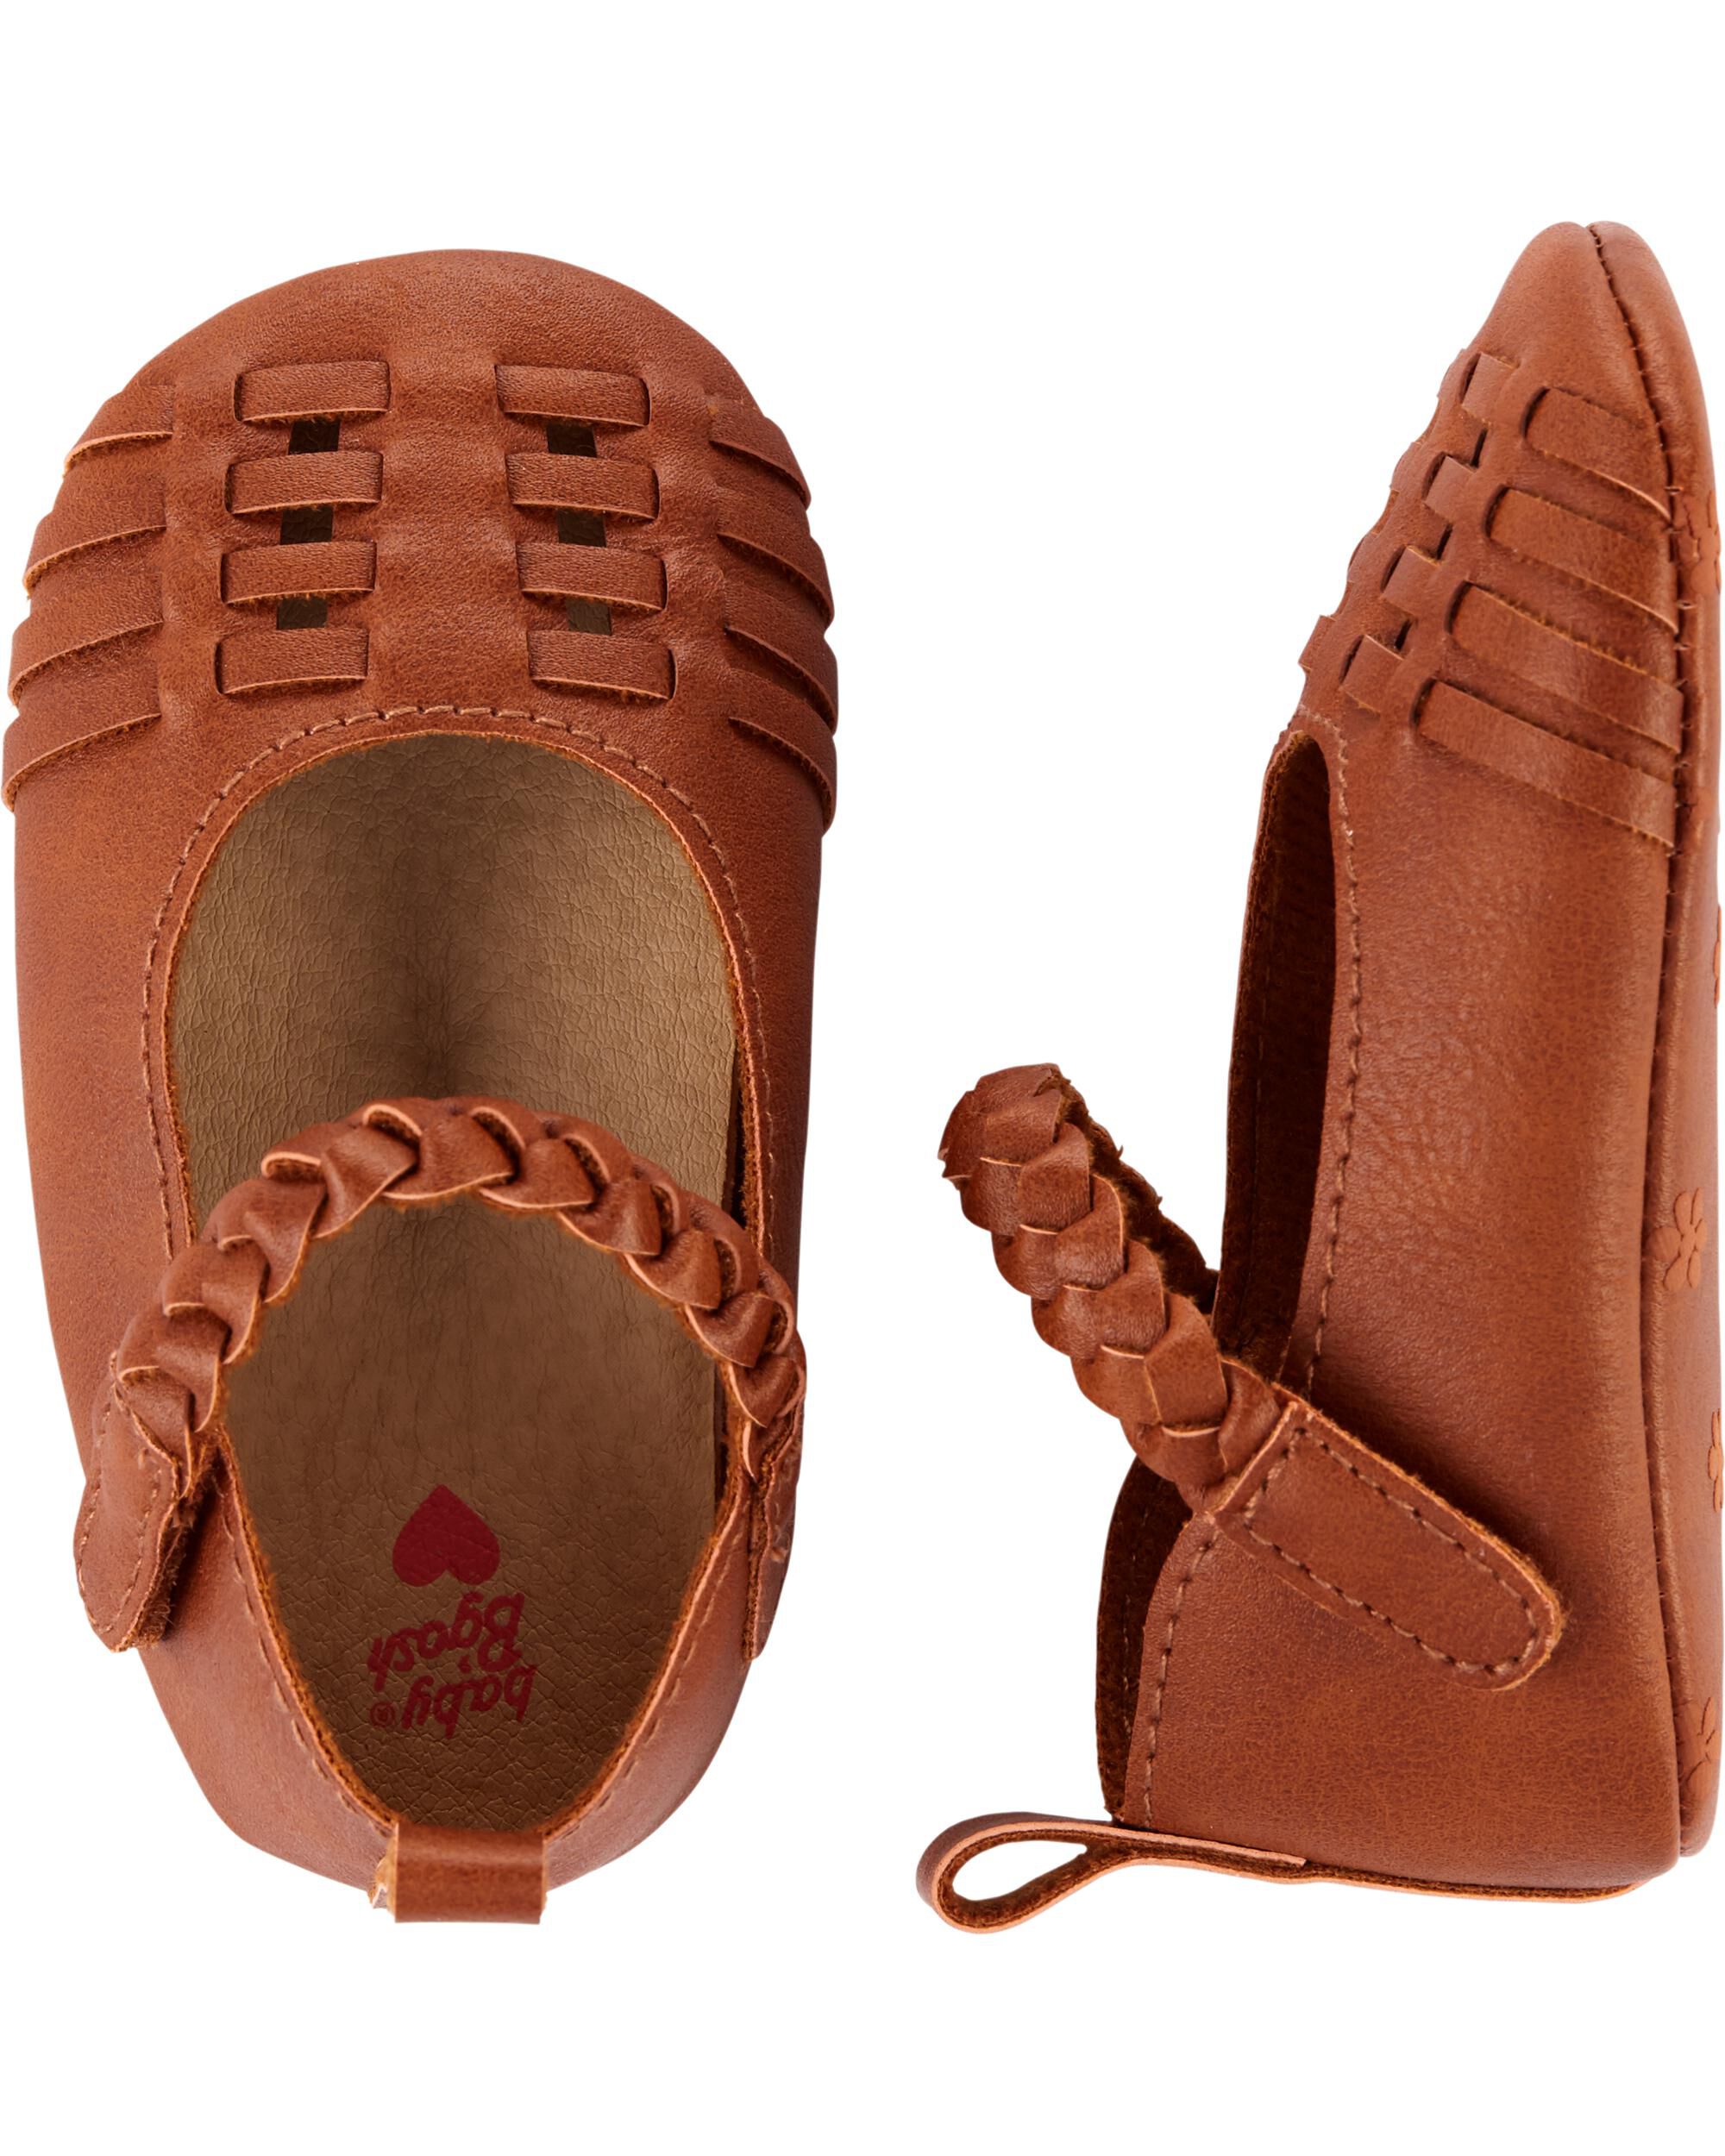 carter's moccasin crib shoes